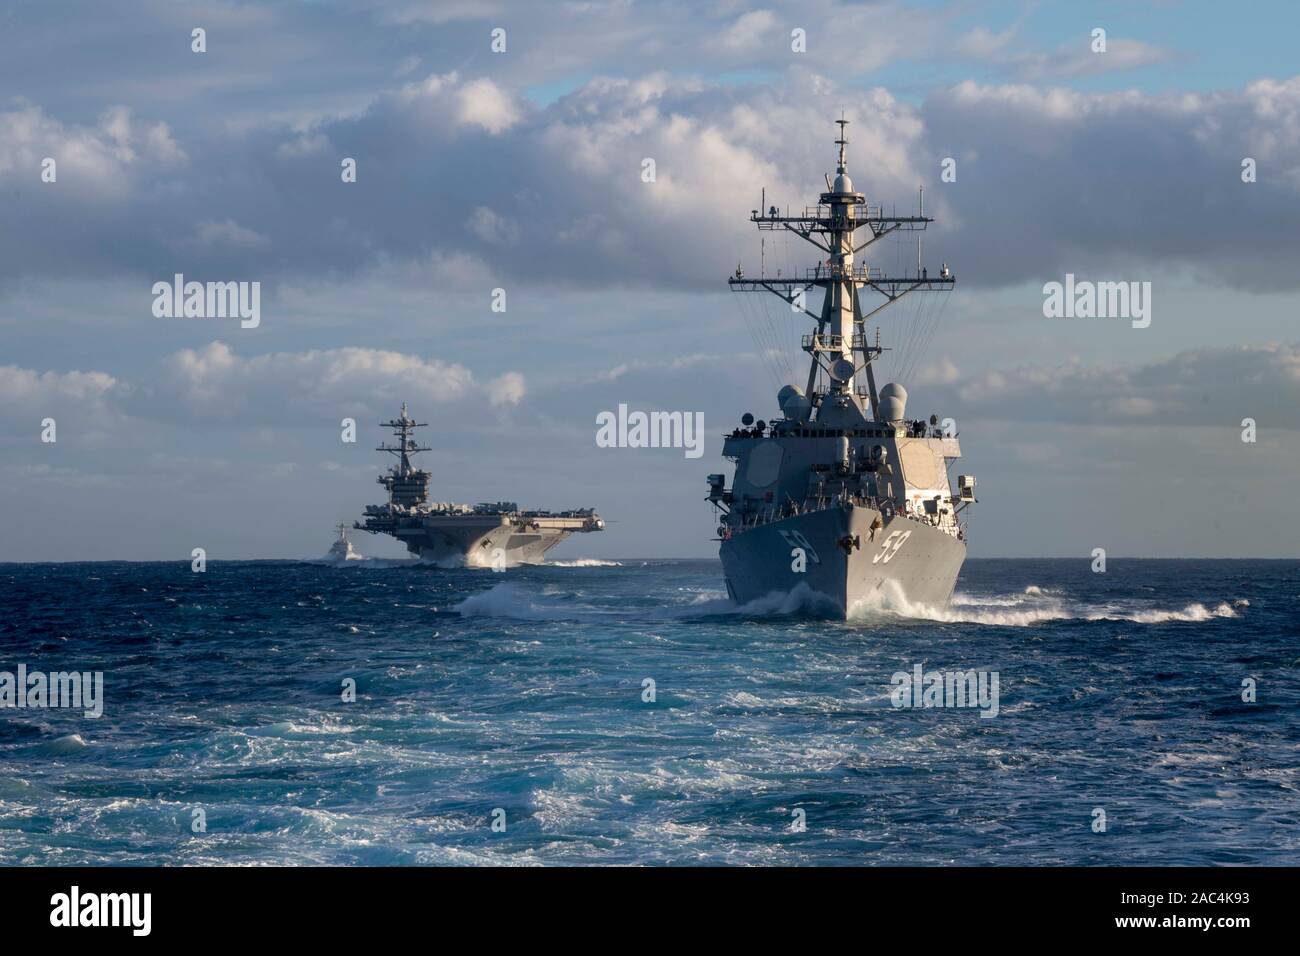 PACIFIC OCEAN (Nov. 27, 2019) The Arleigh Burke-class guided-missile destroyer USS Russel (DDG 59) and the aircraft carrier USS Theodore Roosevelt (CVN 71) transit the Eastern Pacific Ocean Nov. 27, 2019. Paul Hamilton is underway conducting routine training in the Eastern Pacific Ocean. (U.S. Navy photo by Mass Communication Specialist 3rd Class Matthew F. Jackson) Stock Photo